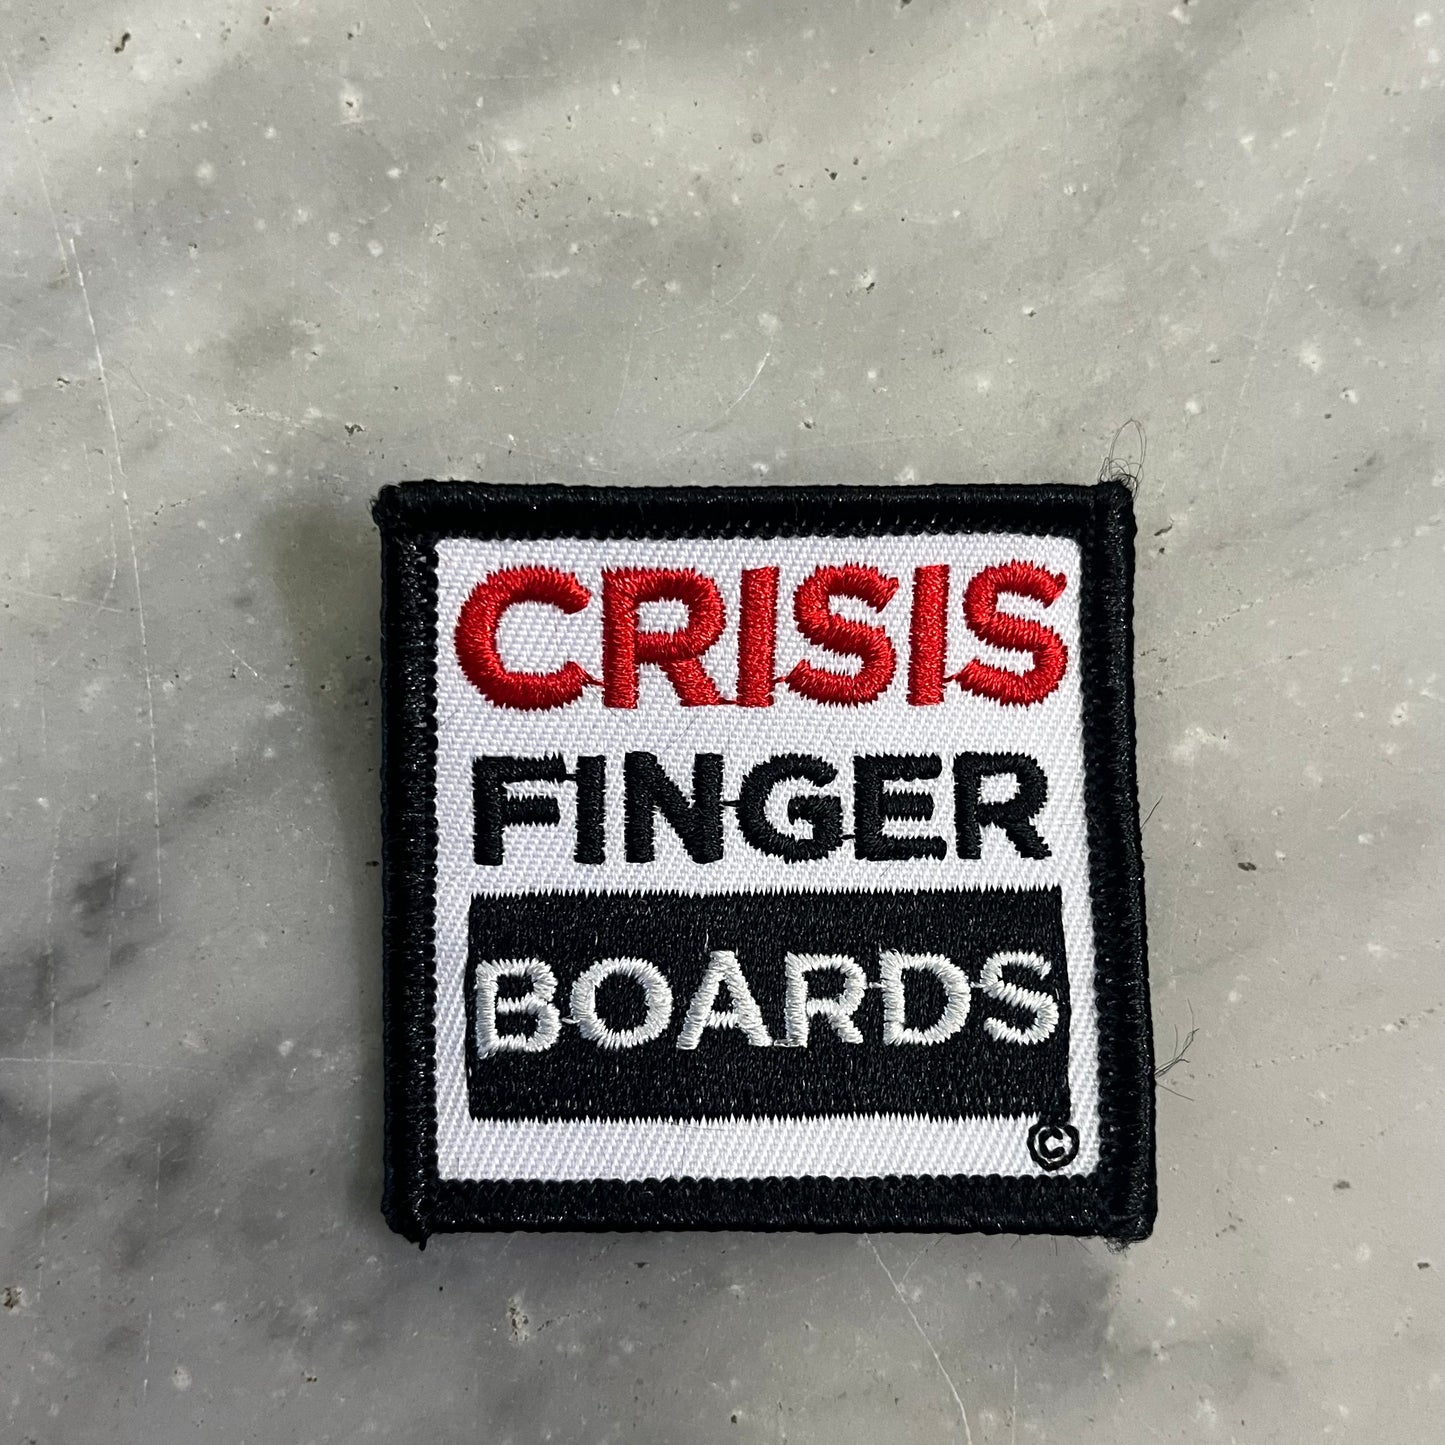 Crisis Fingerboards Patch